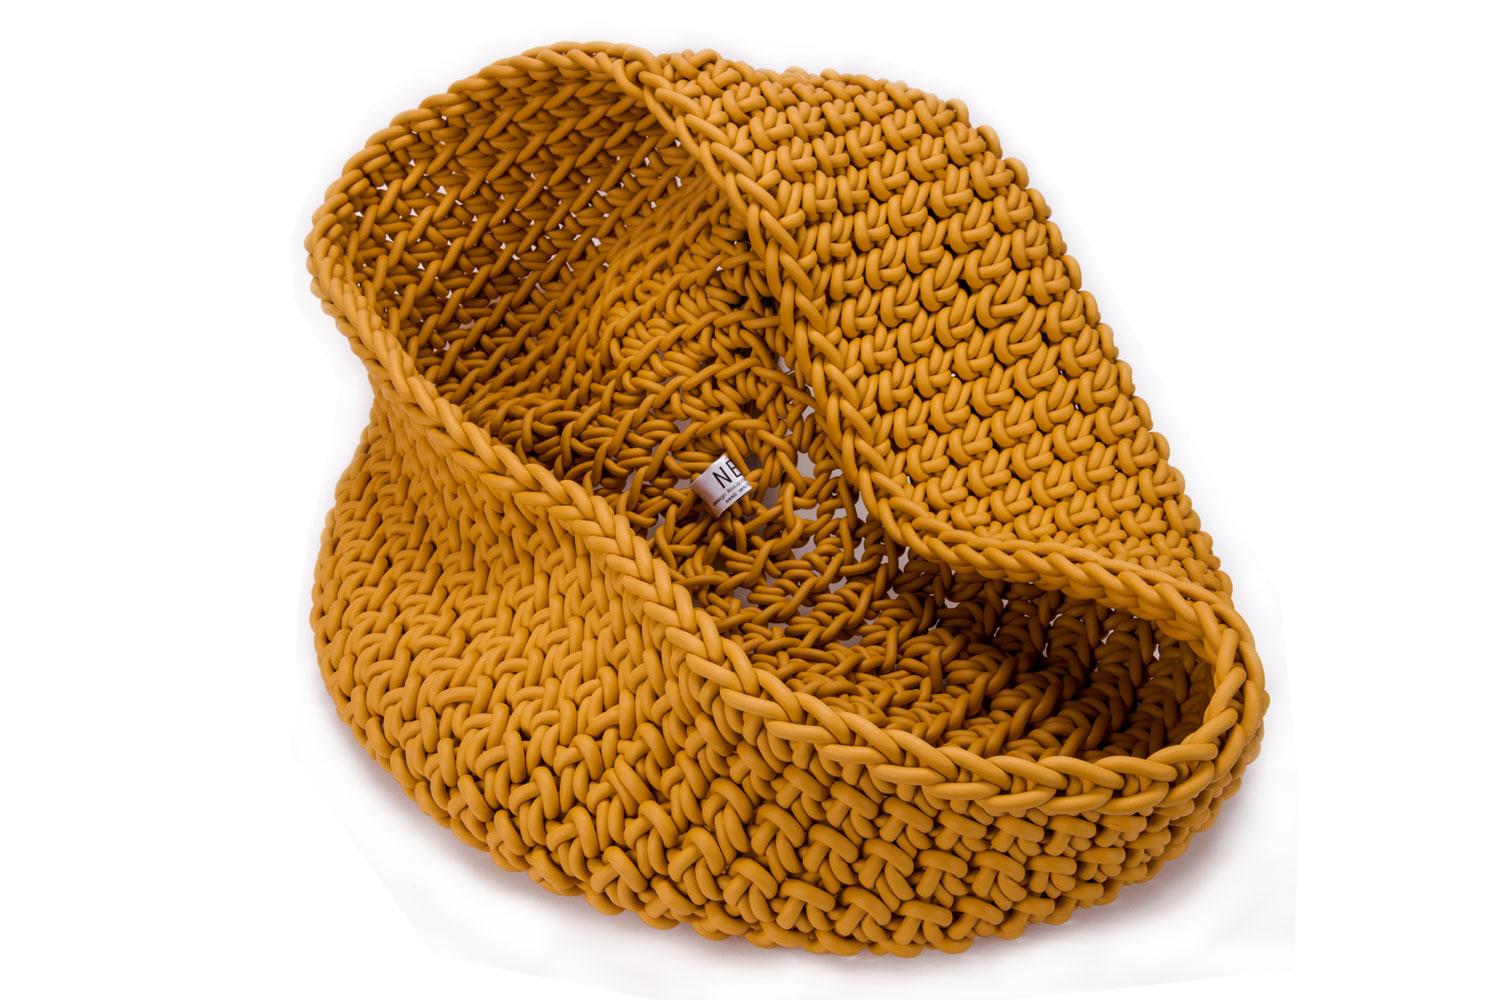 Hand knit in Italy, this yellow ochre large neoprene basket is great for indoor or outdoor use. Great for all kinds of practical storage (pillows, blankets, toys, plants) and organization and super stylish and artful.

Due to the beautiful, unique